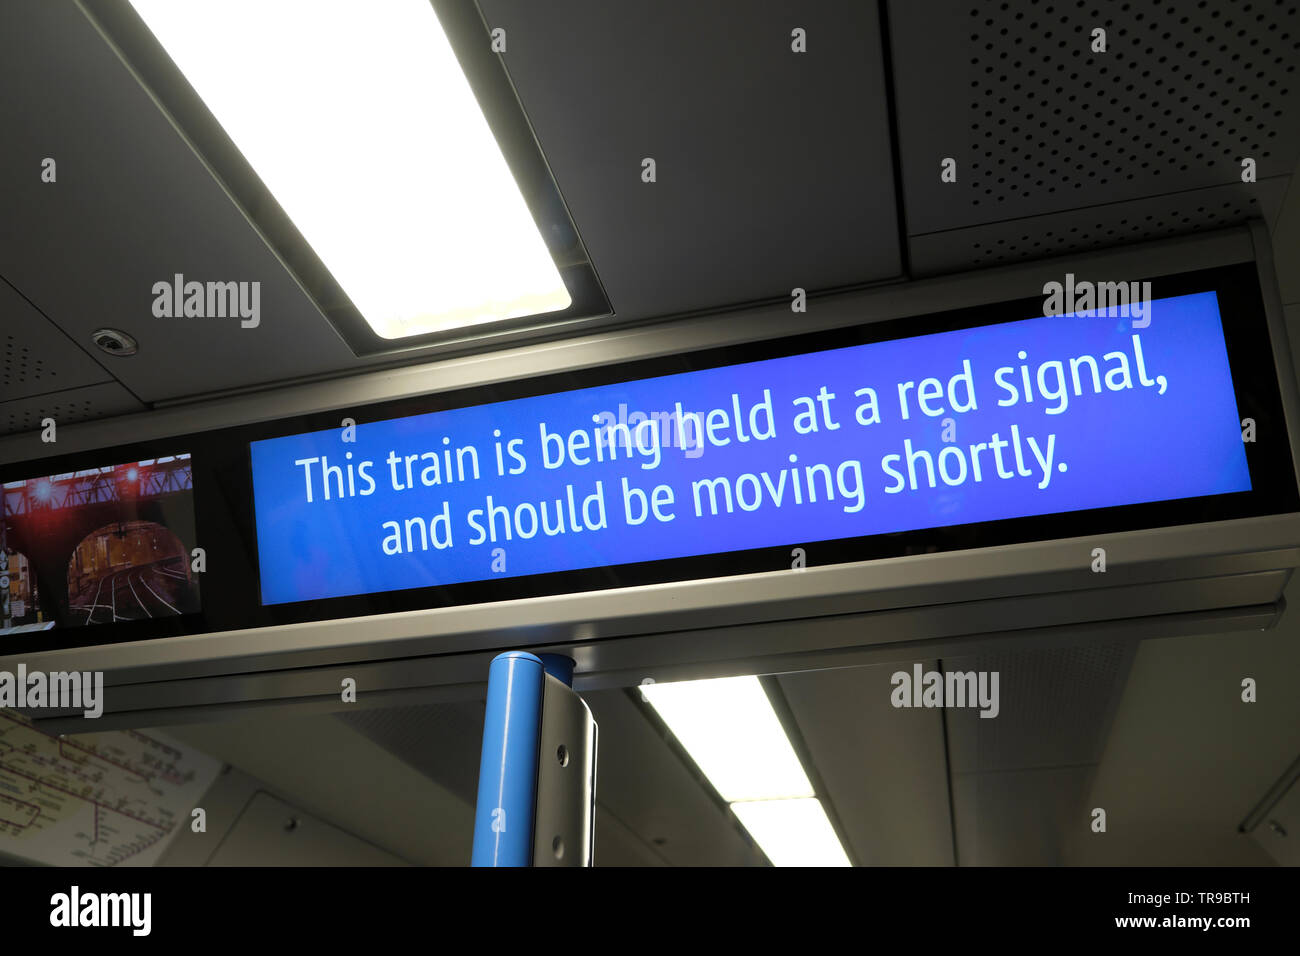 'This train is being held at a red signal, and should be moving shortly' sign on a train carriage due to disruption of service in London England UK Stock Photo